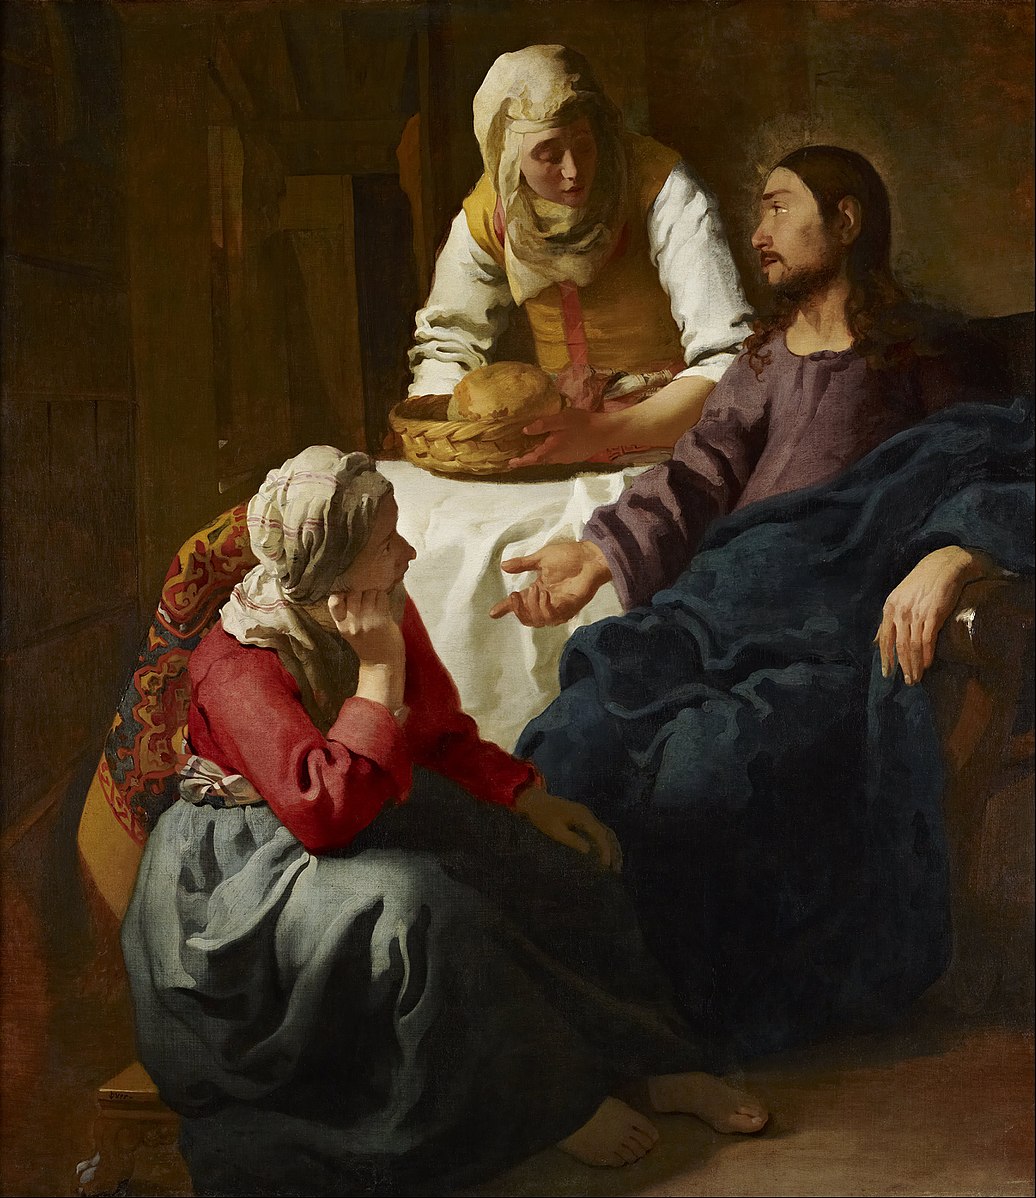 1036px-Johannes_(Jan)_Vermeer_-_Christ_in_the_House_of_Martha_and_Mary_-_Google_Art_Project